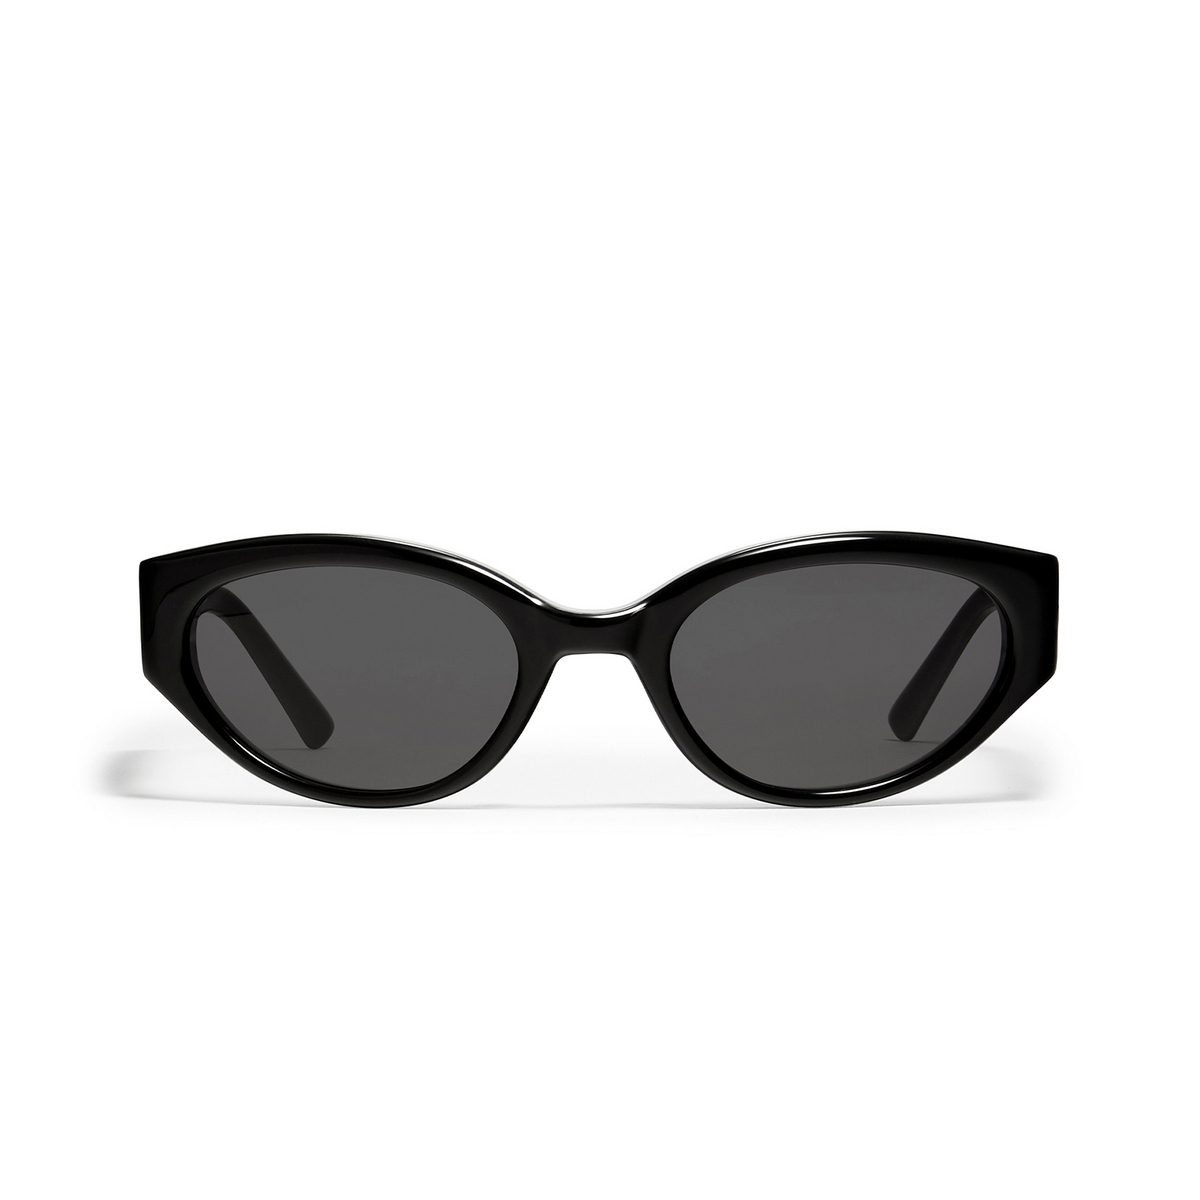 Gentle Monster® Cat-eye Sunglasses: Molto color 01 Black - front view